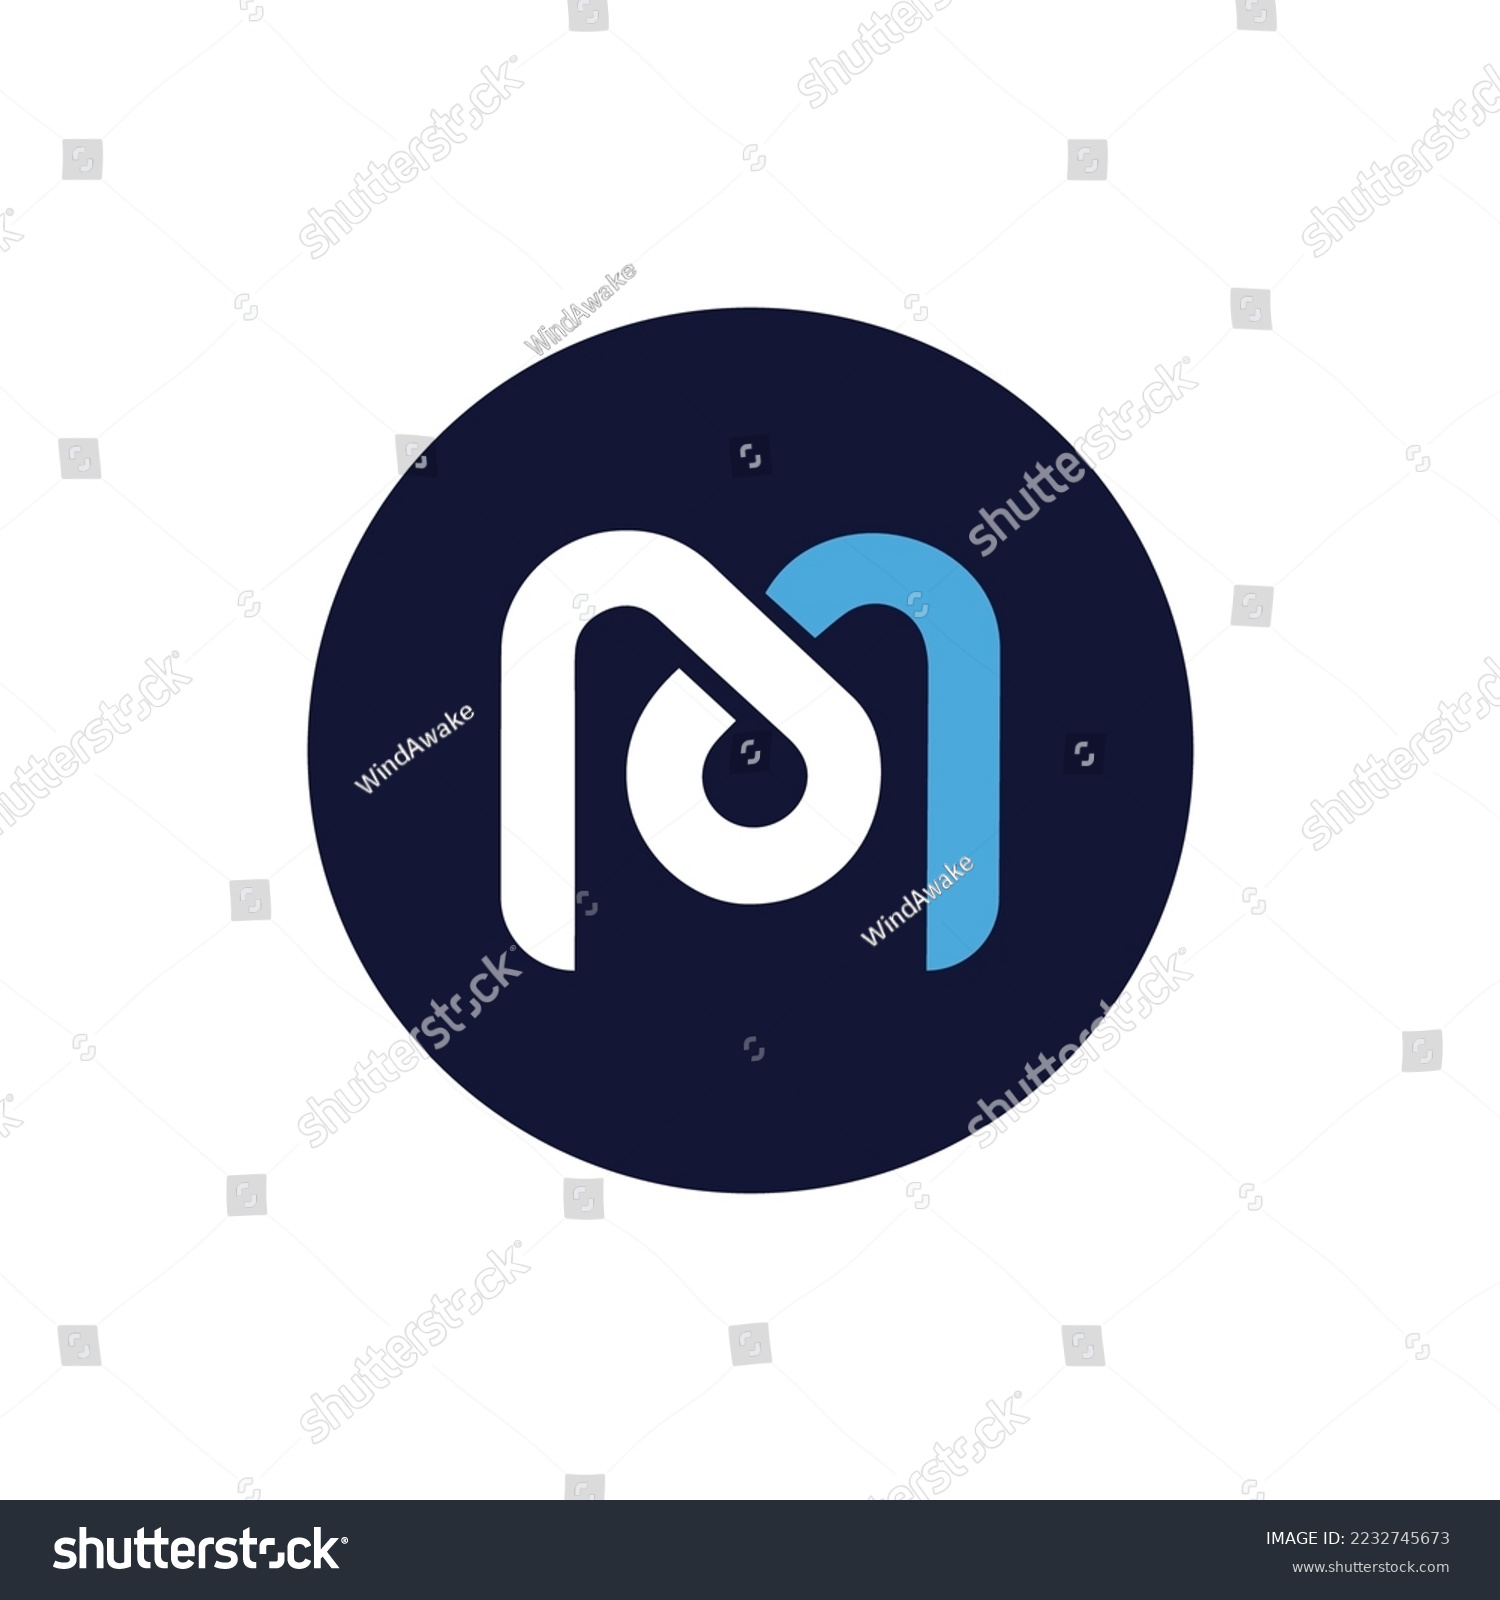 SVG of Mdex (MDX) coin icon isolated on white background. svg